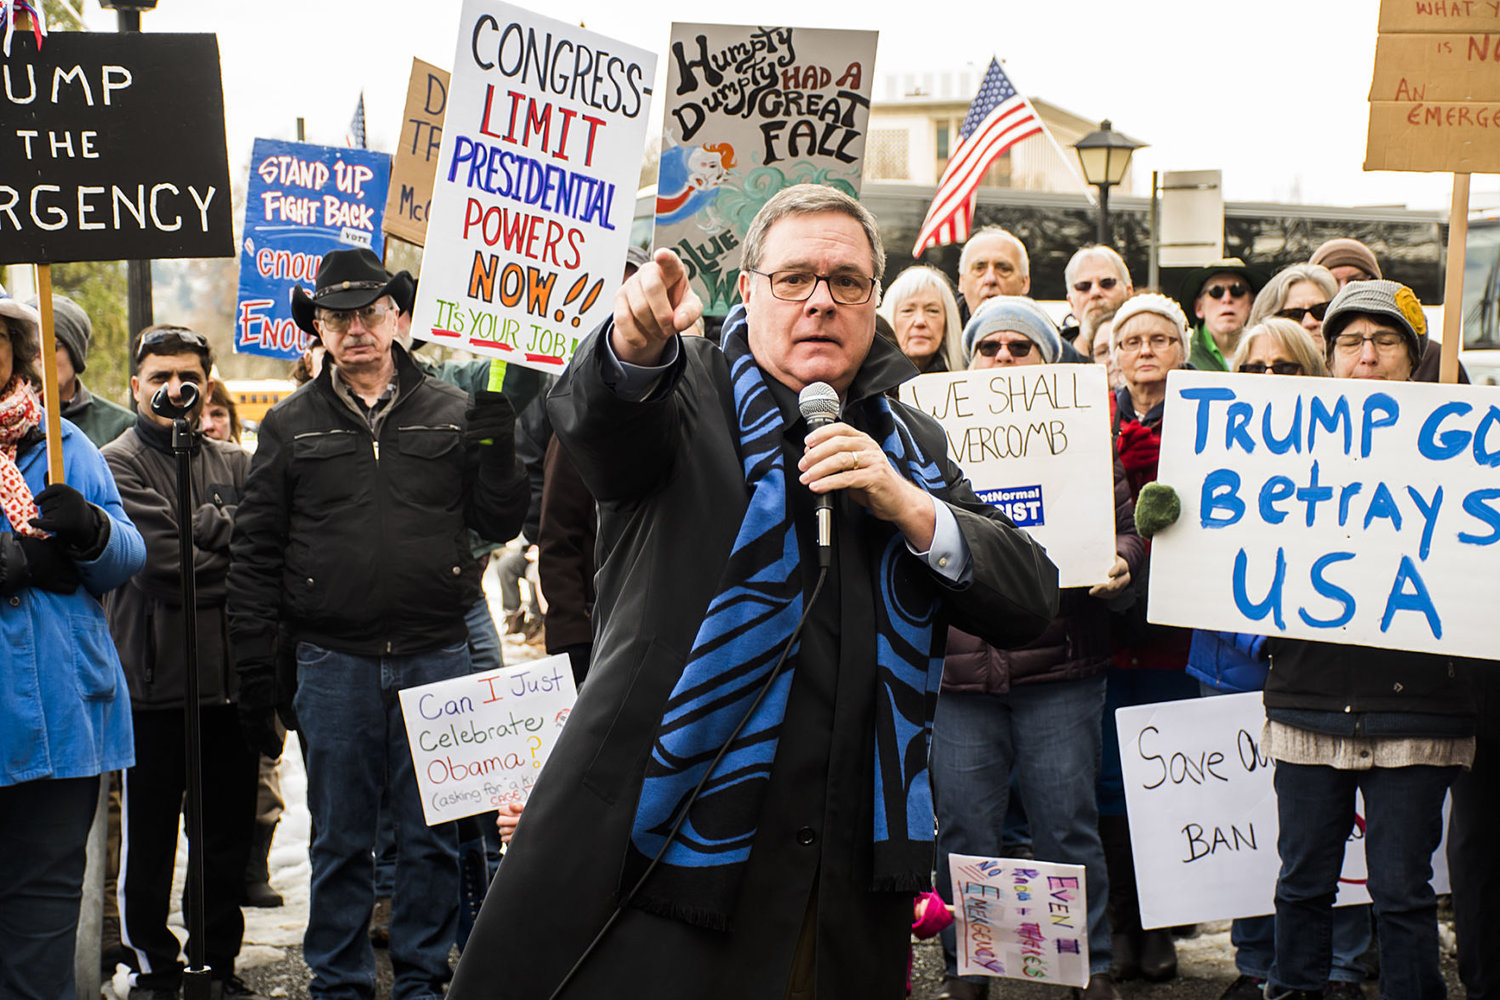 U.S. Rep. Denny Heck speaks during a rally in Olympia in February 2019.